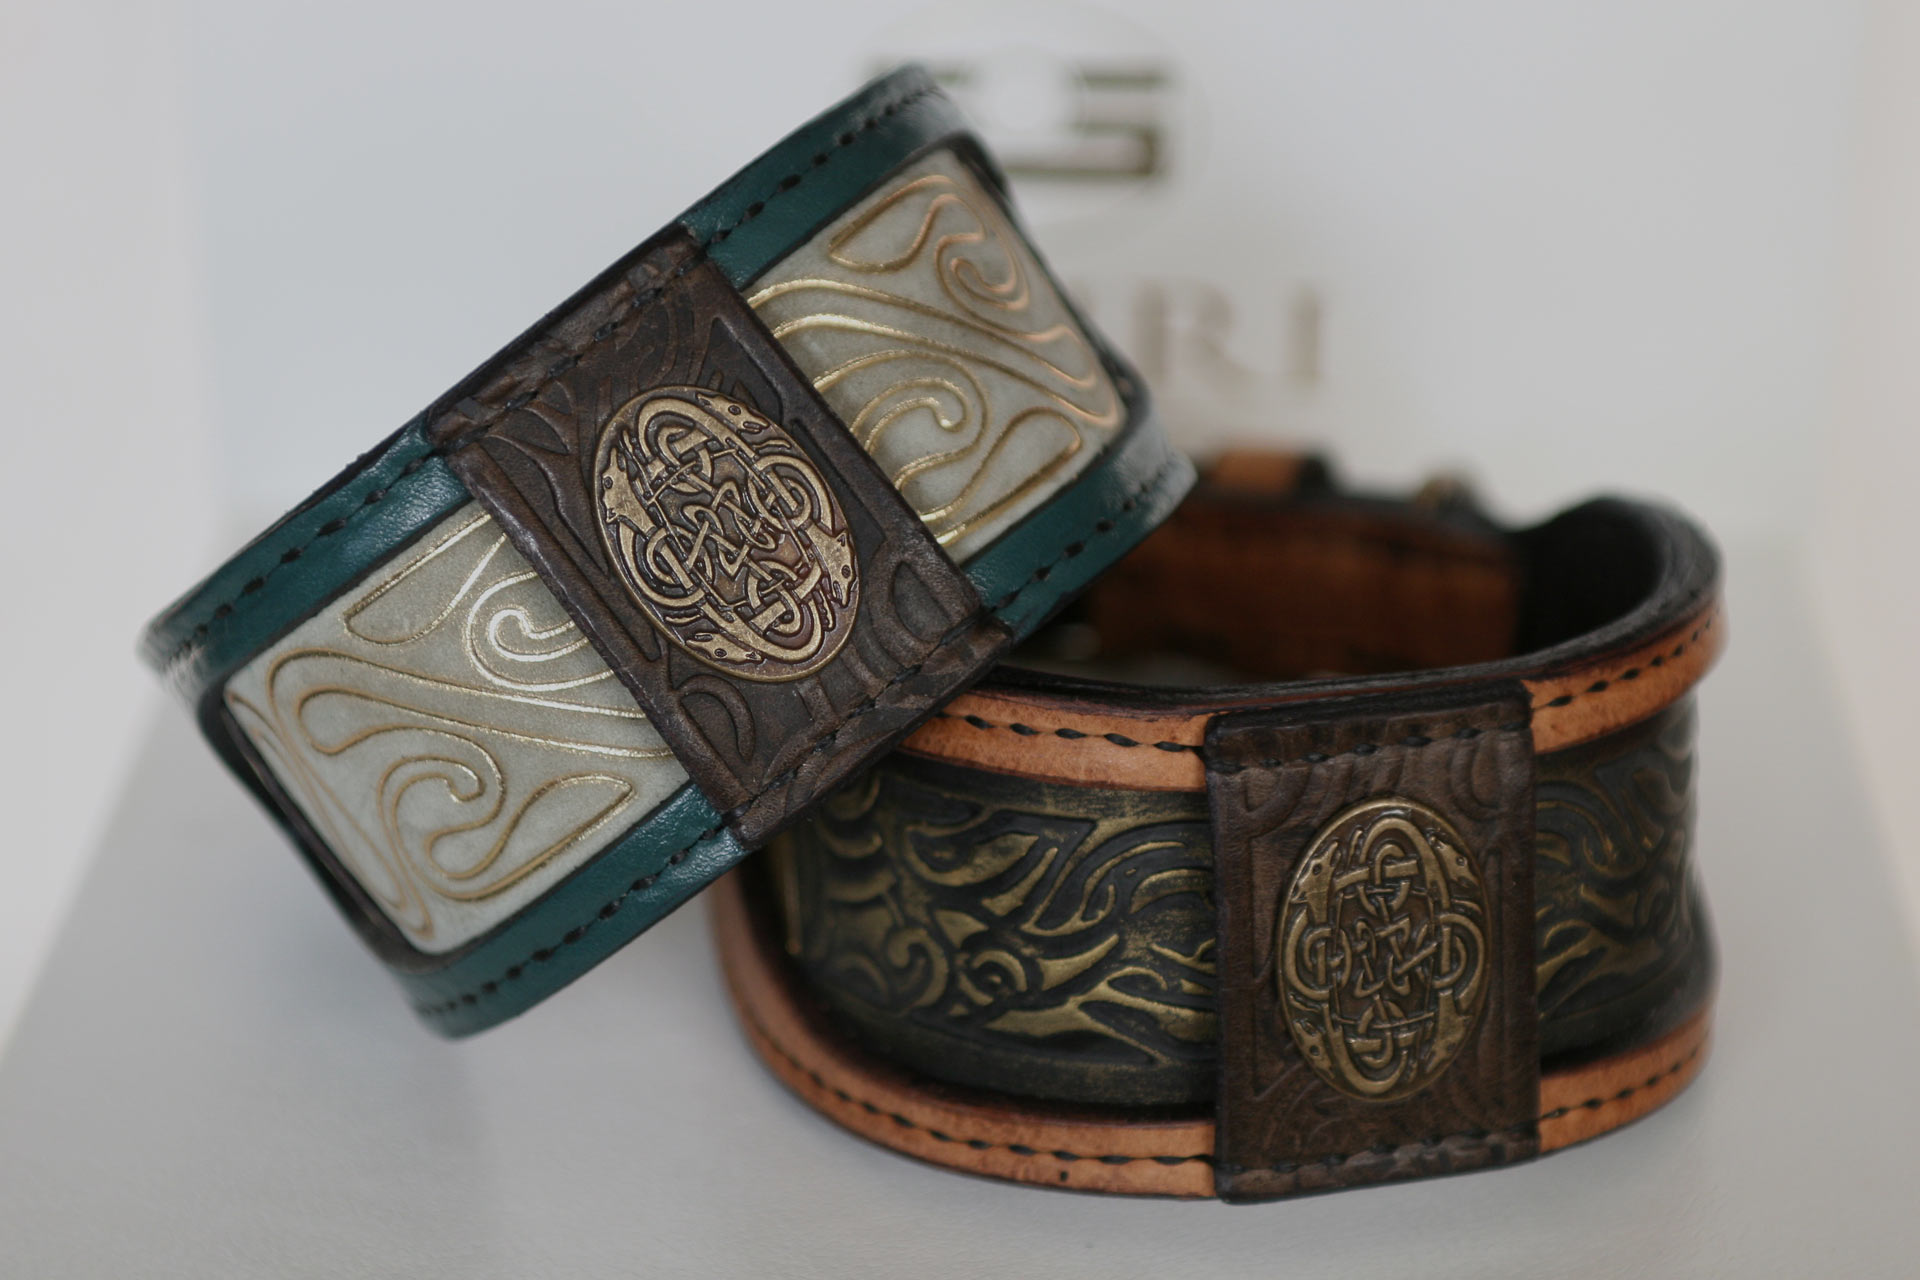 Harakhan Kennel & Personalized Leather Dog Collars by Workshop Sauri